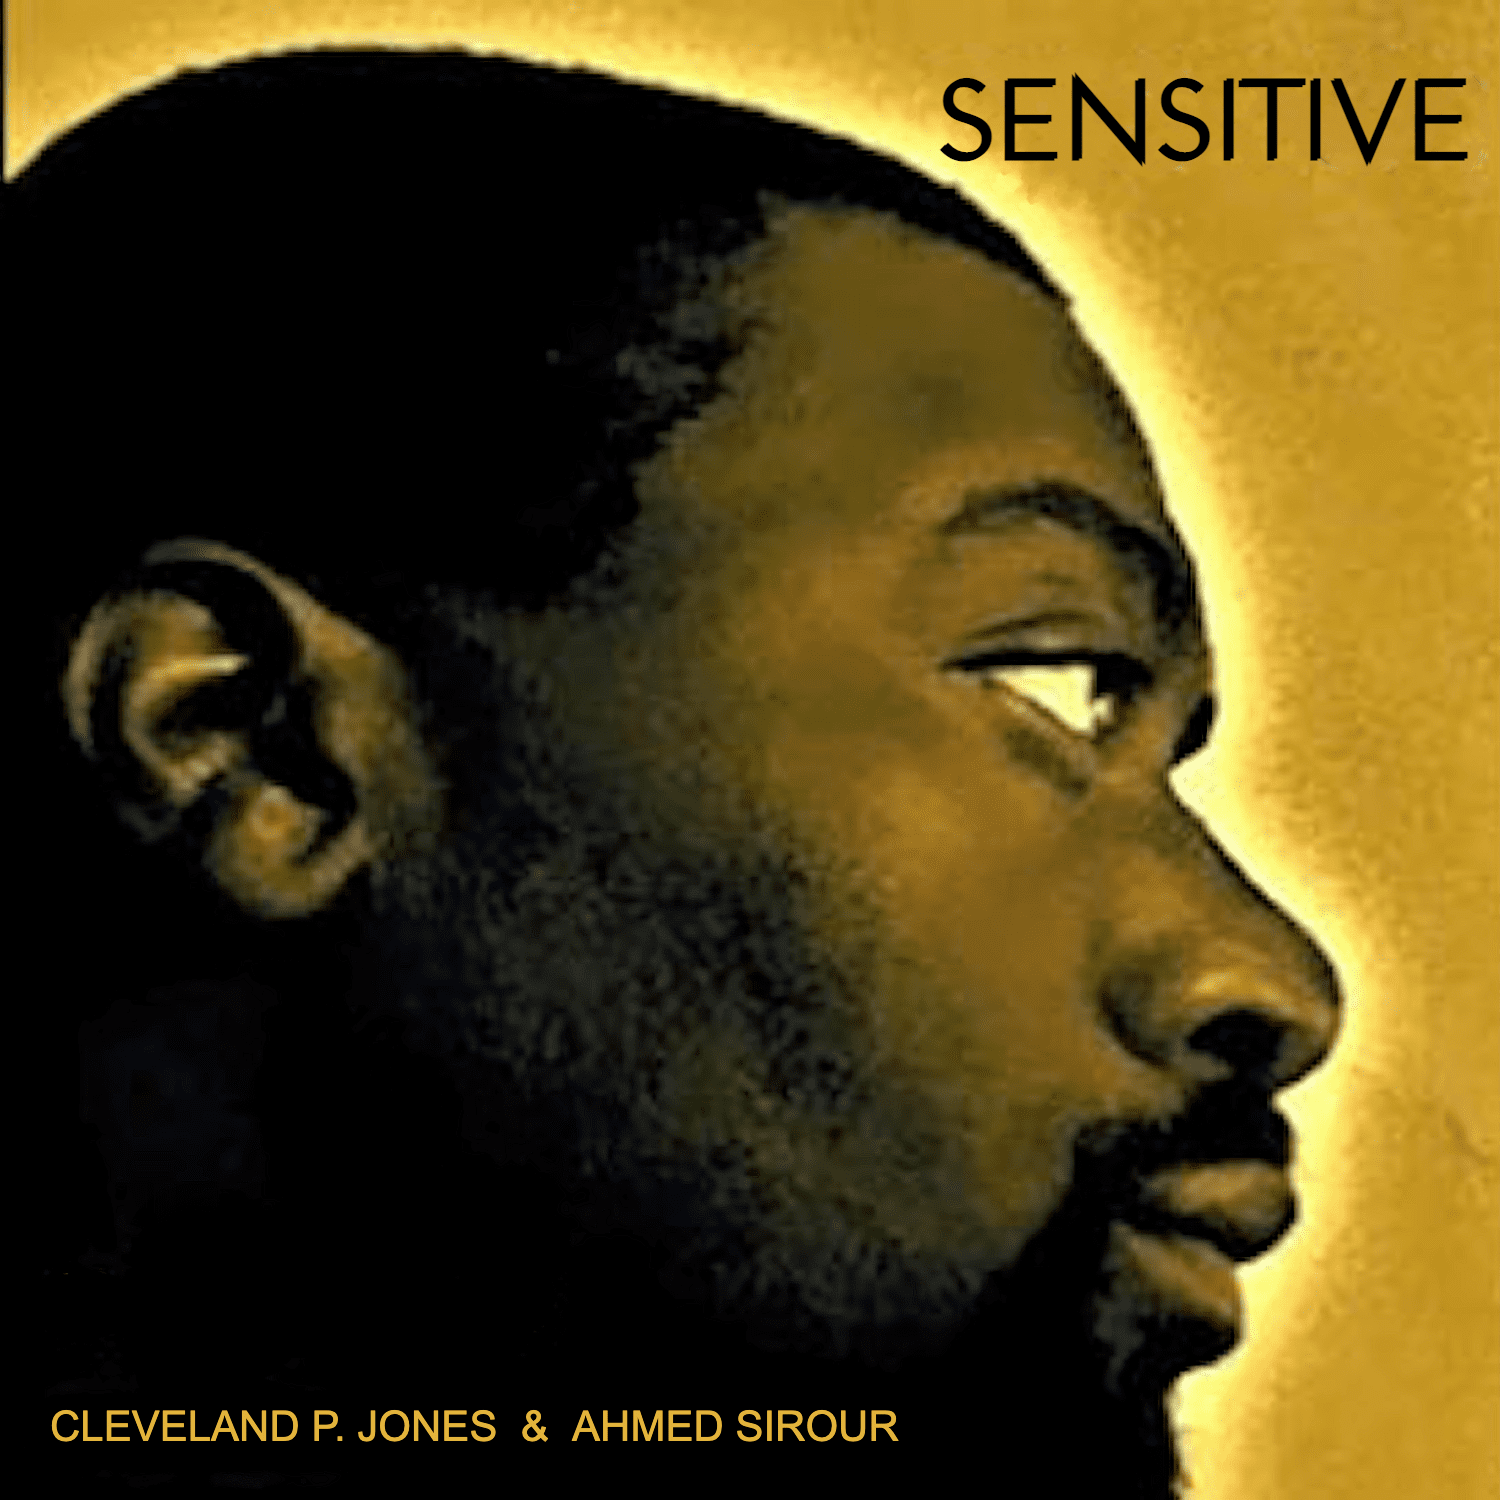 Cover art for "Sensitive" (special NFT edition) - Cleveland P. Jones & Ahmed Sirour by Ahmed Sirour